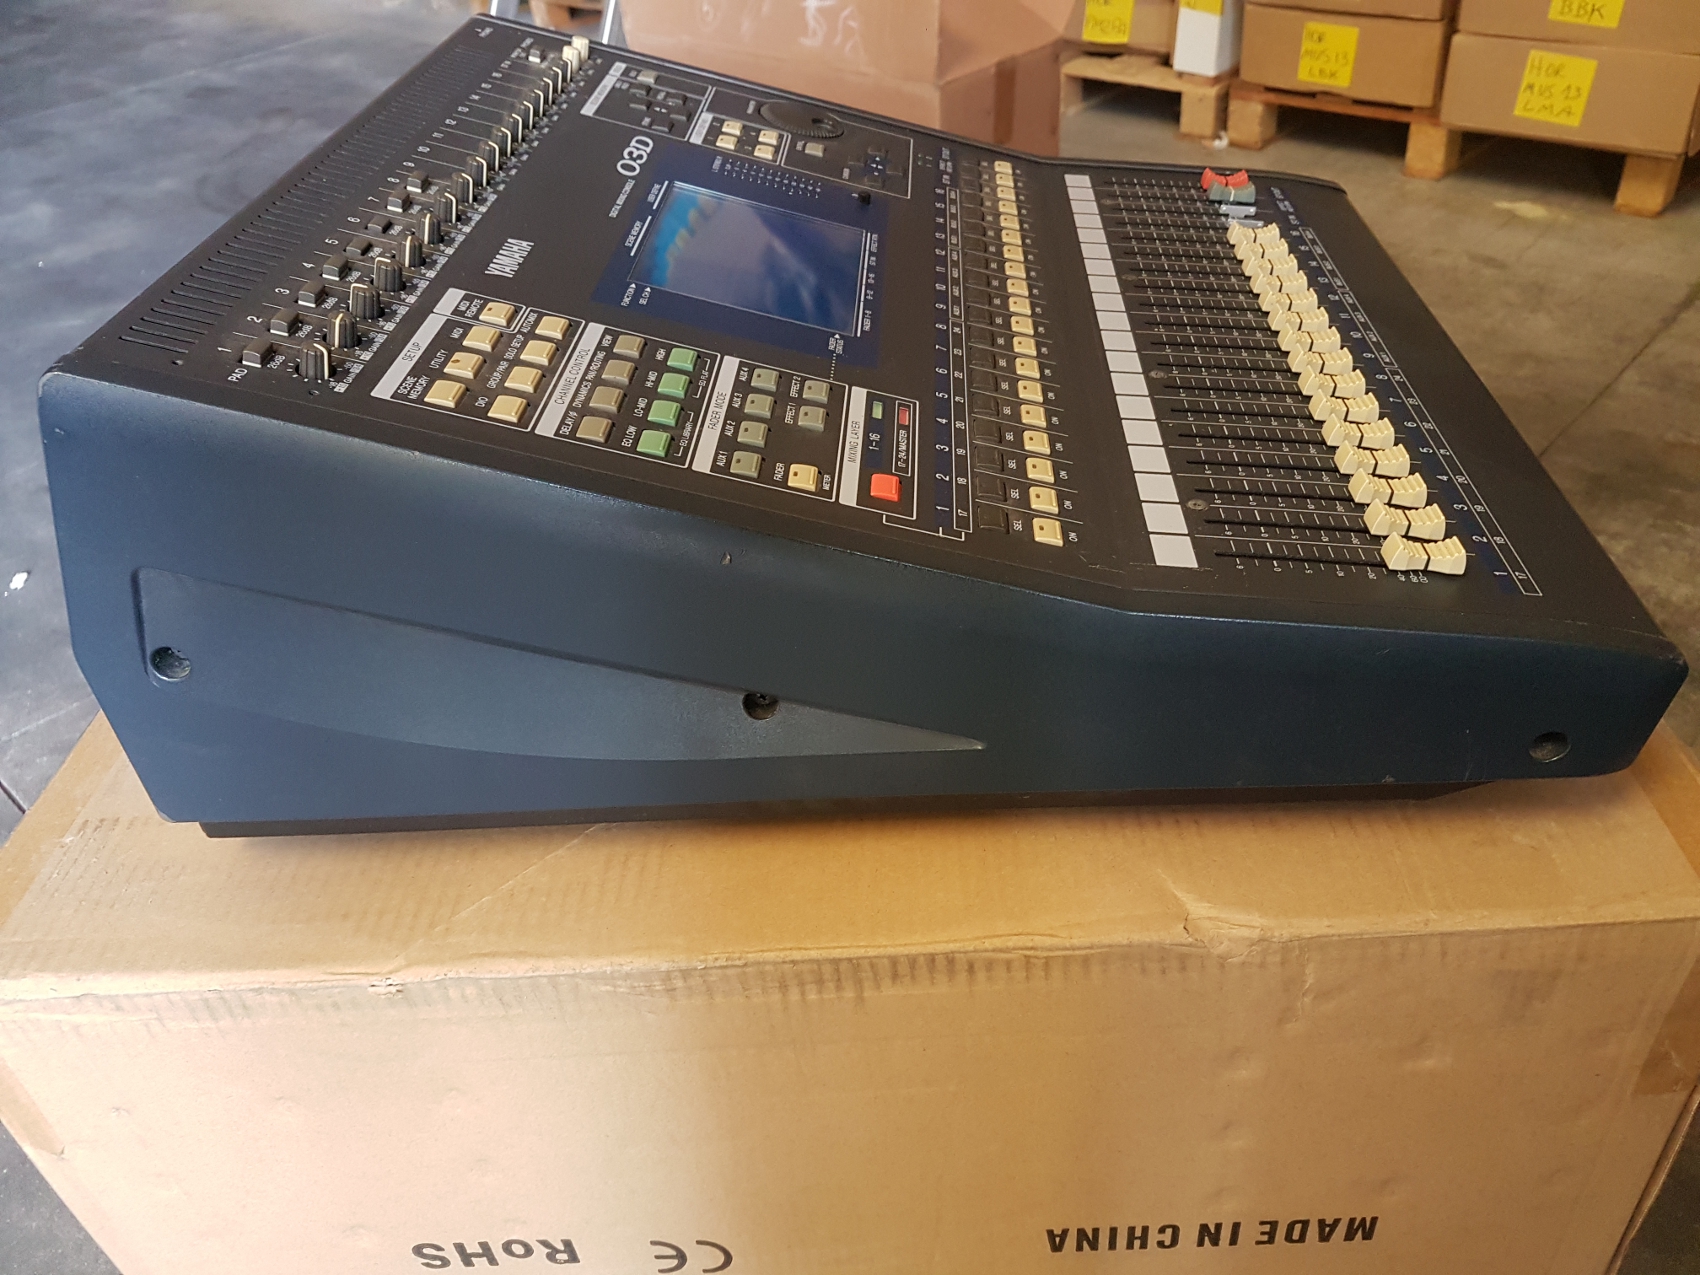 YAMAHA 03D MIXER DIGITALE 26 IN 18 OUT CON FADER MOTORIZZATI 60 MM DISPLAY LCD USATO 2